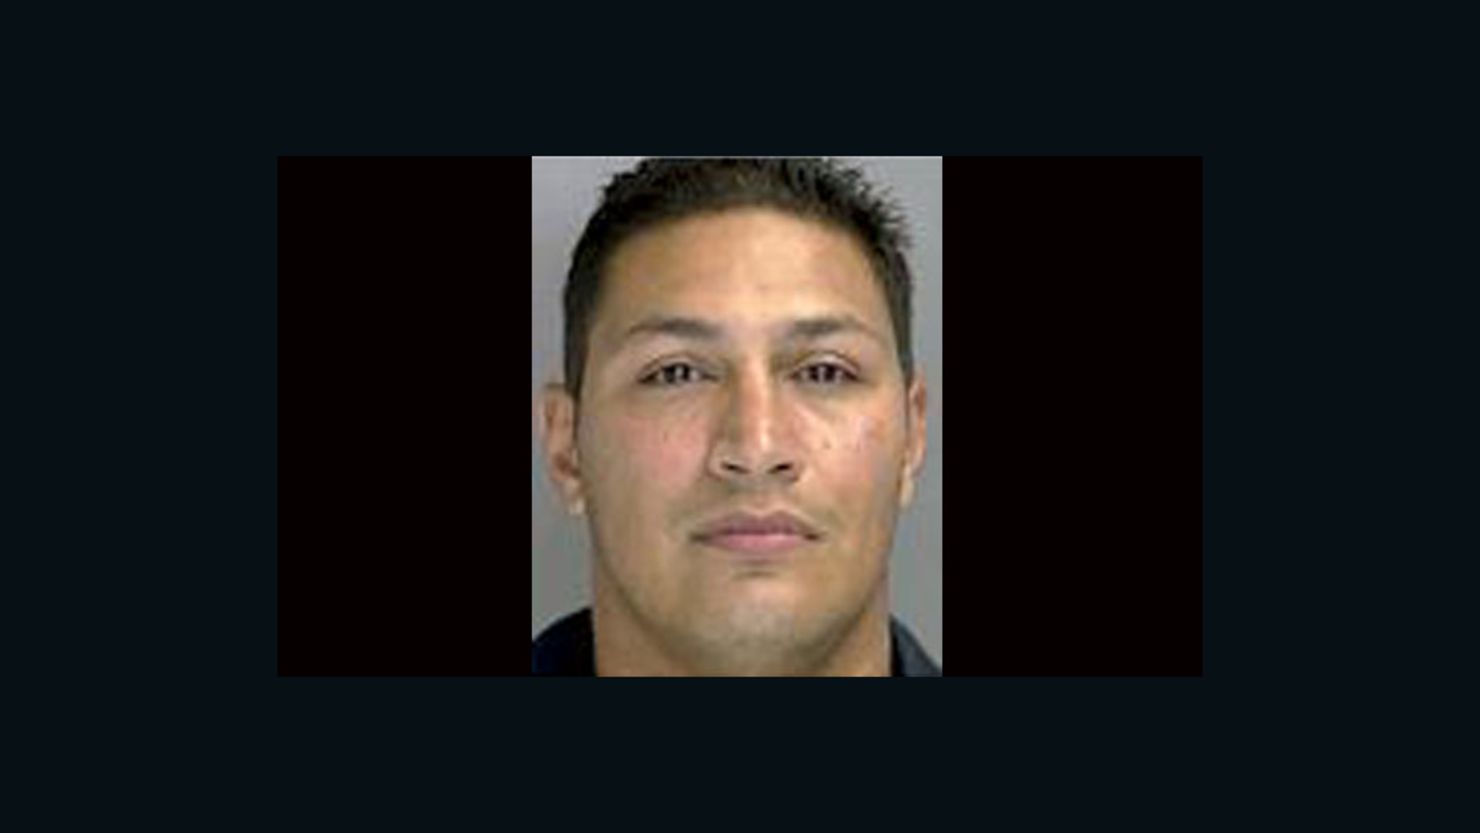 The U.S. Marshals Service added Miguel Torres to its most wanted list in June 2011.